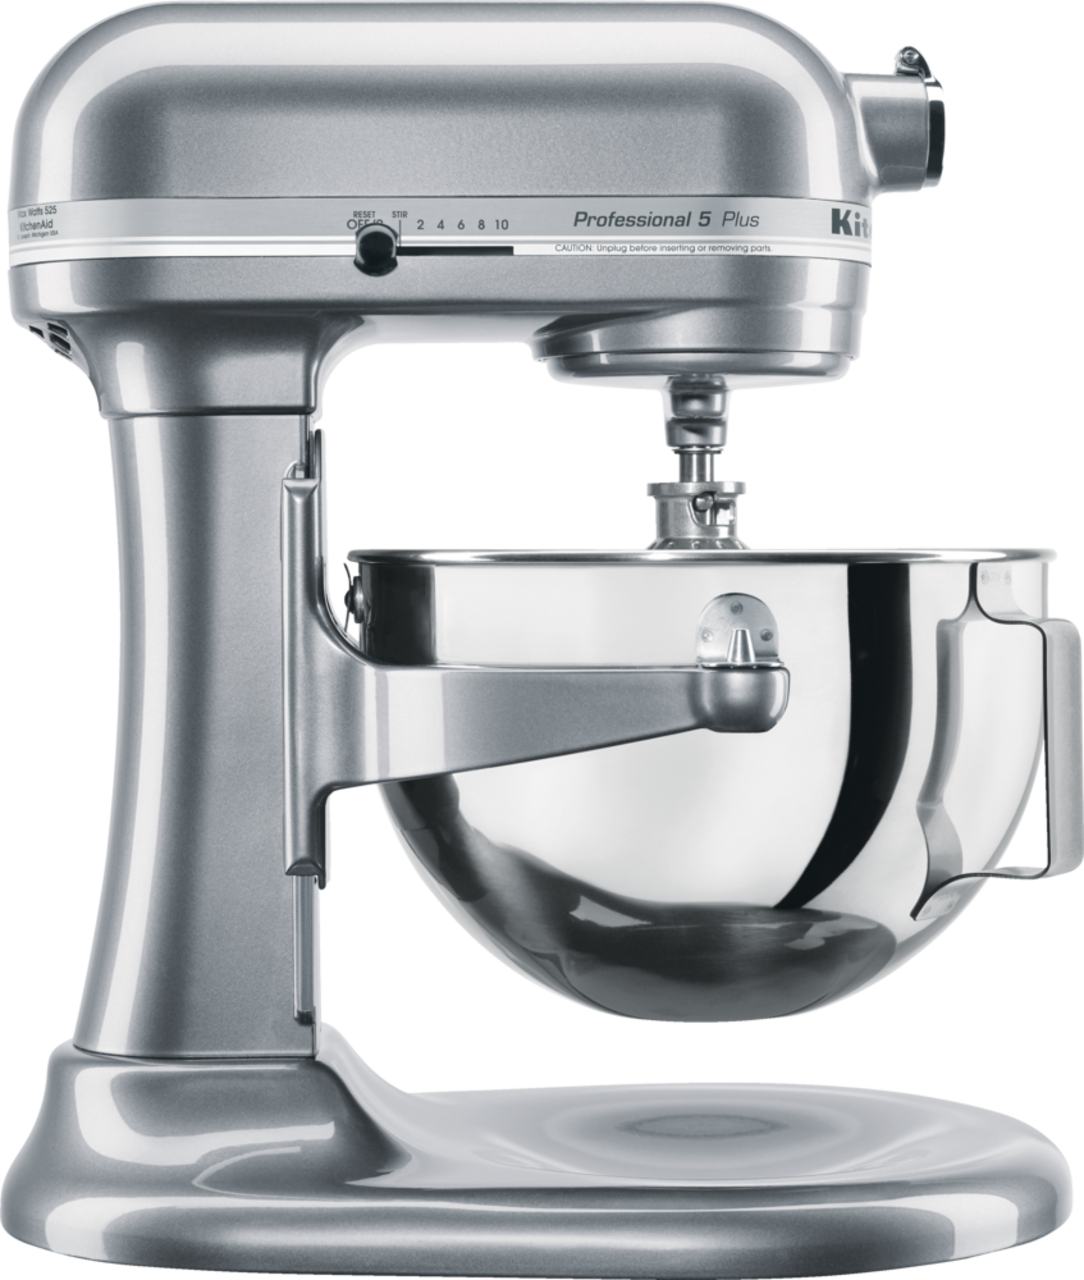 https://media-www.canadiantire.ca/product/living/kitchen/kitchen-appliances/0432170/kitchen-aid-pro-stand-mixer-metallic-chrome-ade75dfa-0600-4512-bf53-d174ae63f482.png?imdensity=1&imwidth=640&impolicy=mZoom